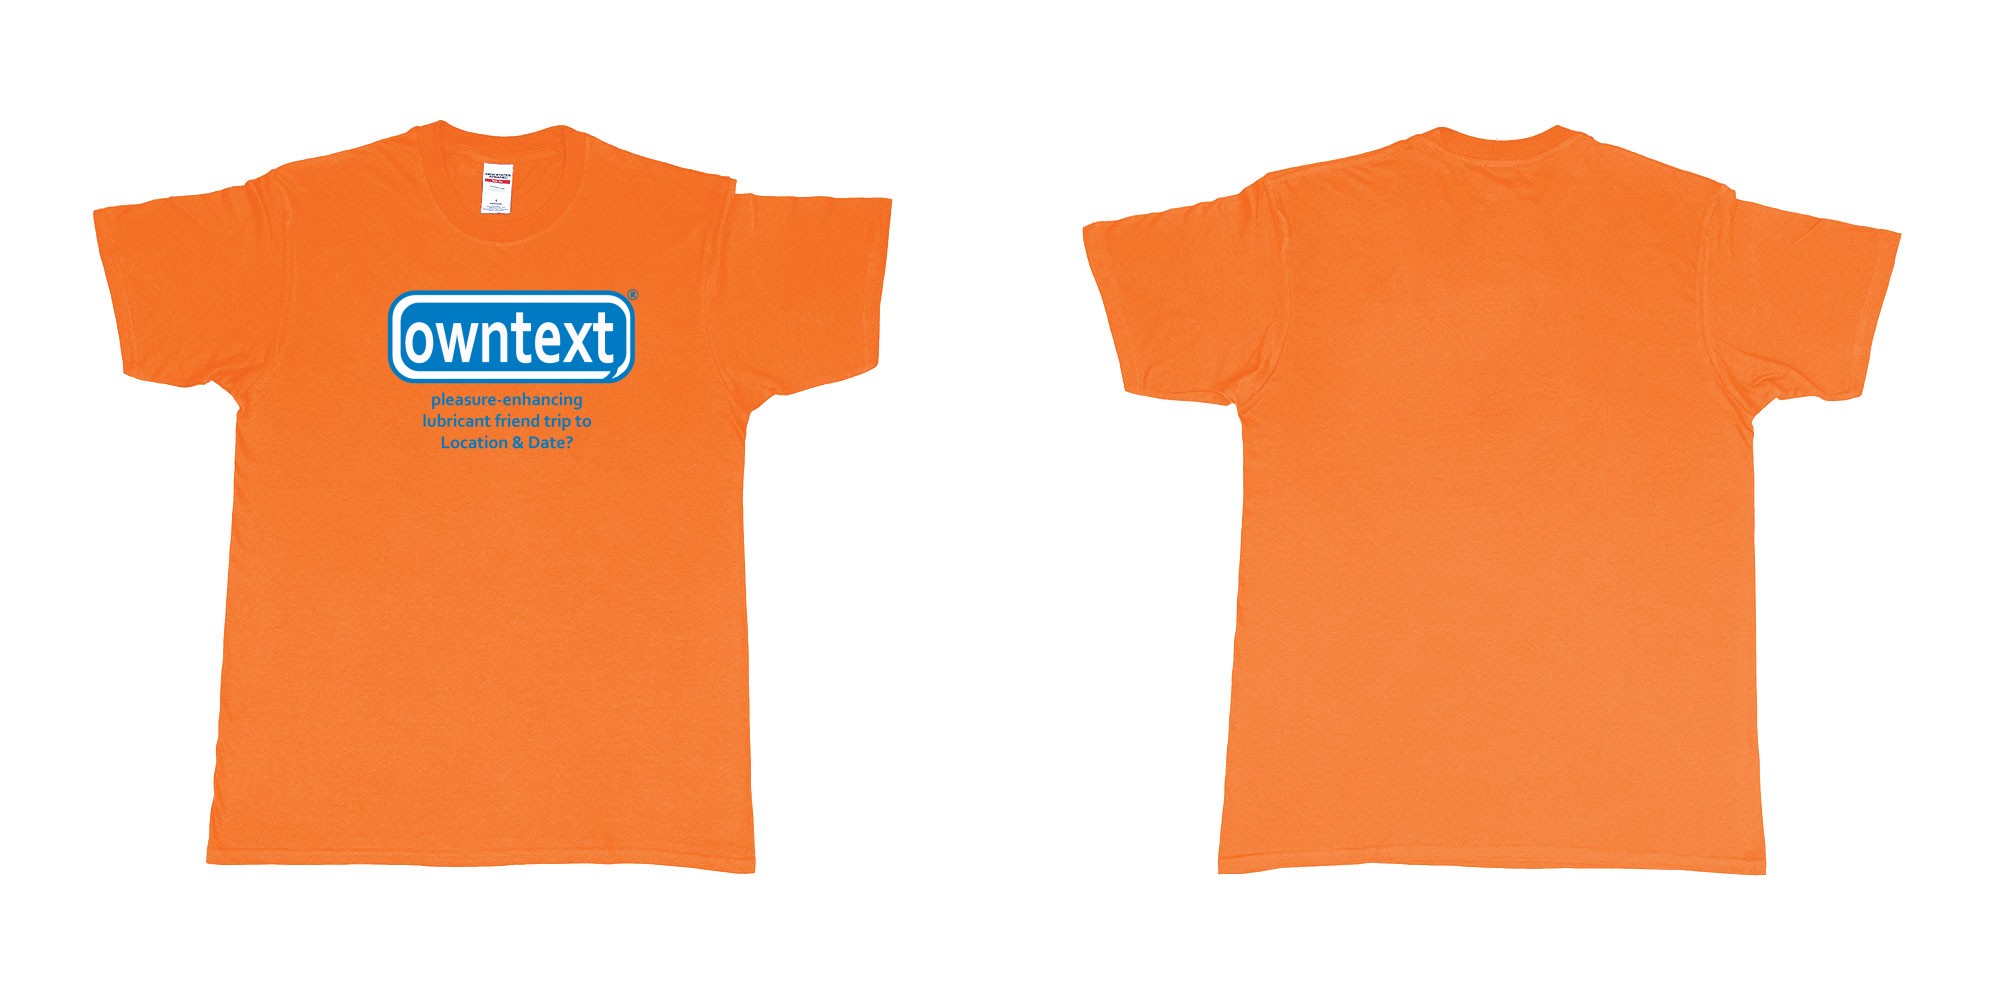 Custom tshirt design Durex in fabric color orange choice your own text made in Bali by The Pirate Way